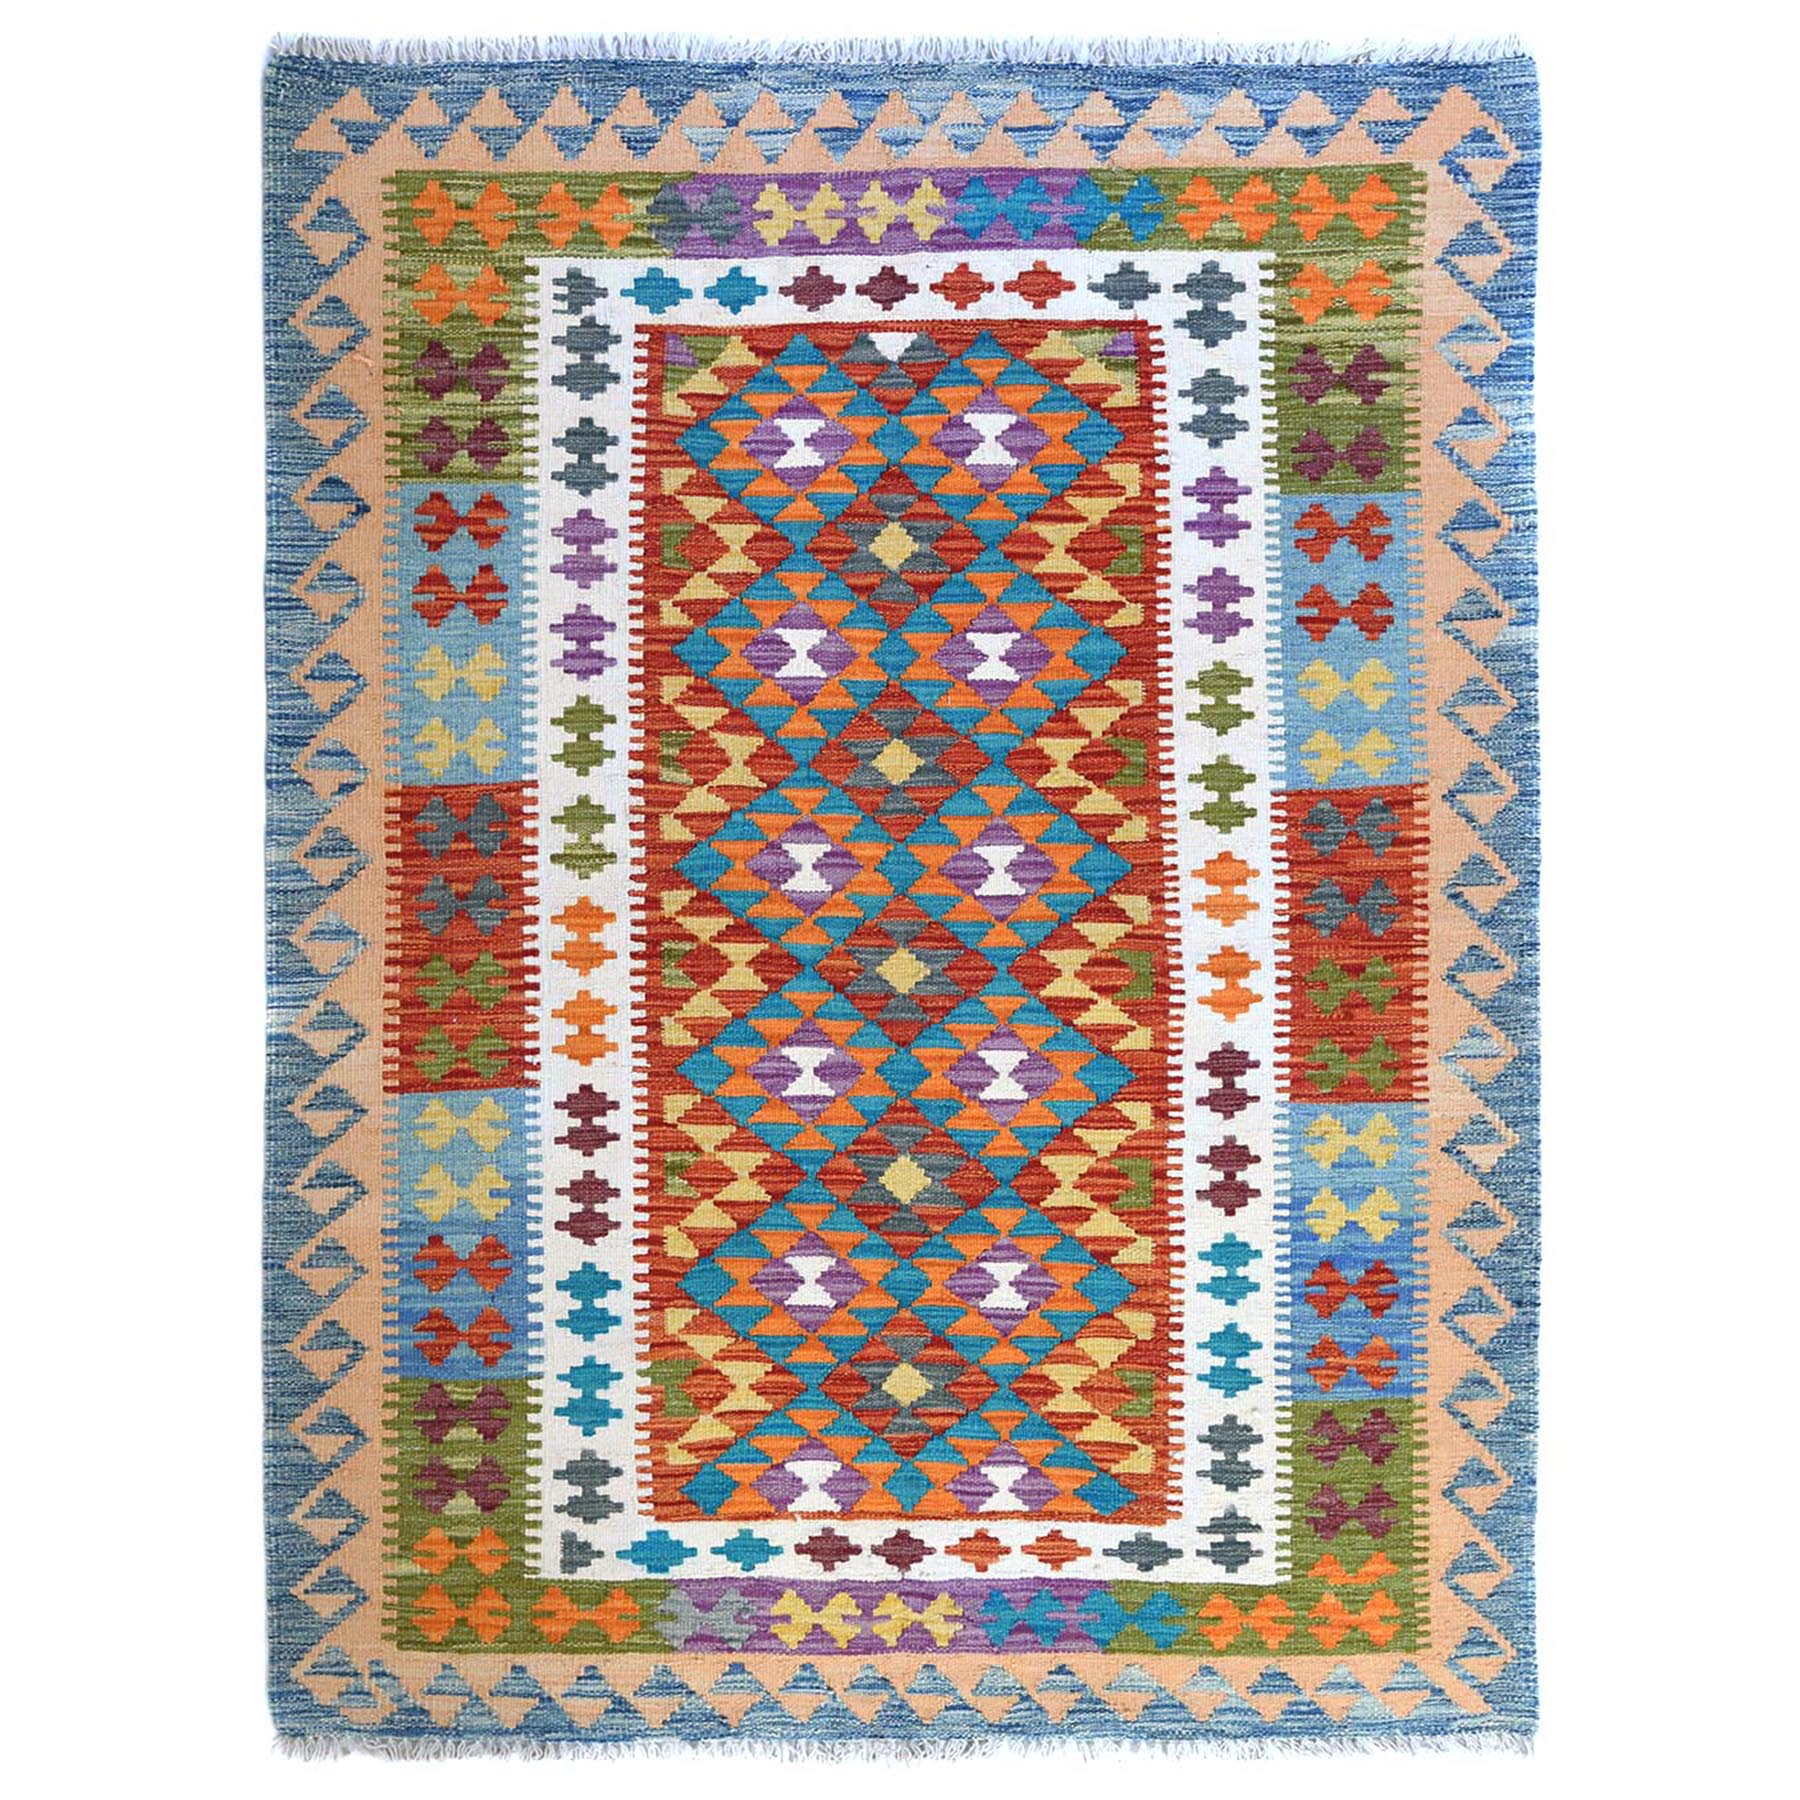 4'4"x6' Colorful, Flat Weave, Afghan Kilim with Geometric Design, Vibrant Wool, Hand Woven, Vegetable Dyes, Reversible Oriental Rug 